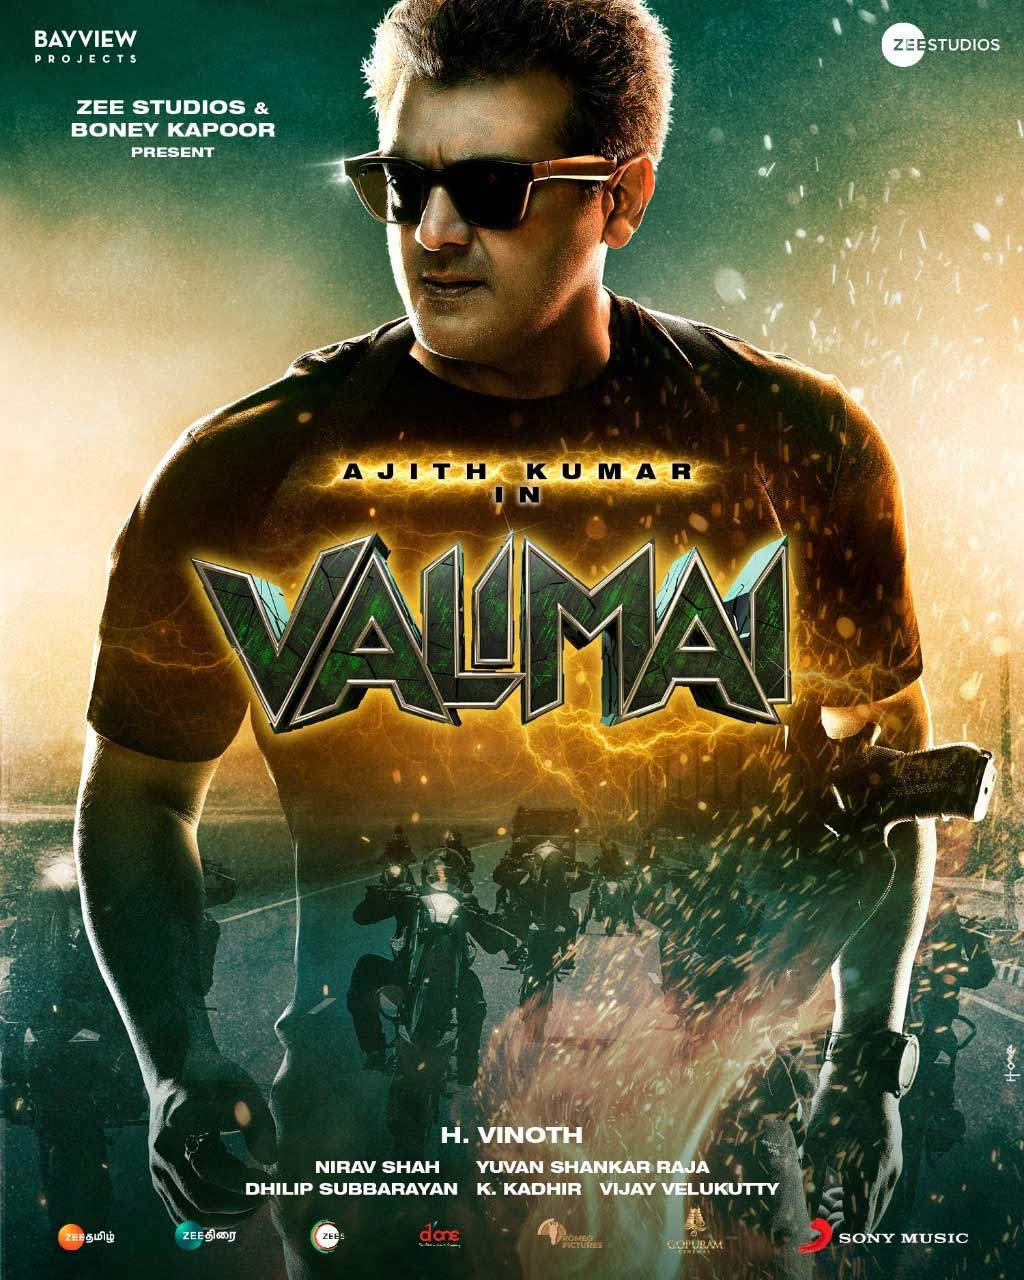 Valimai Movie Poster: Most Trending Movie News in 2021